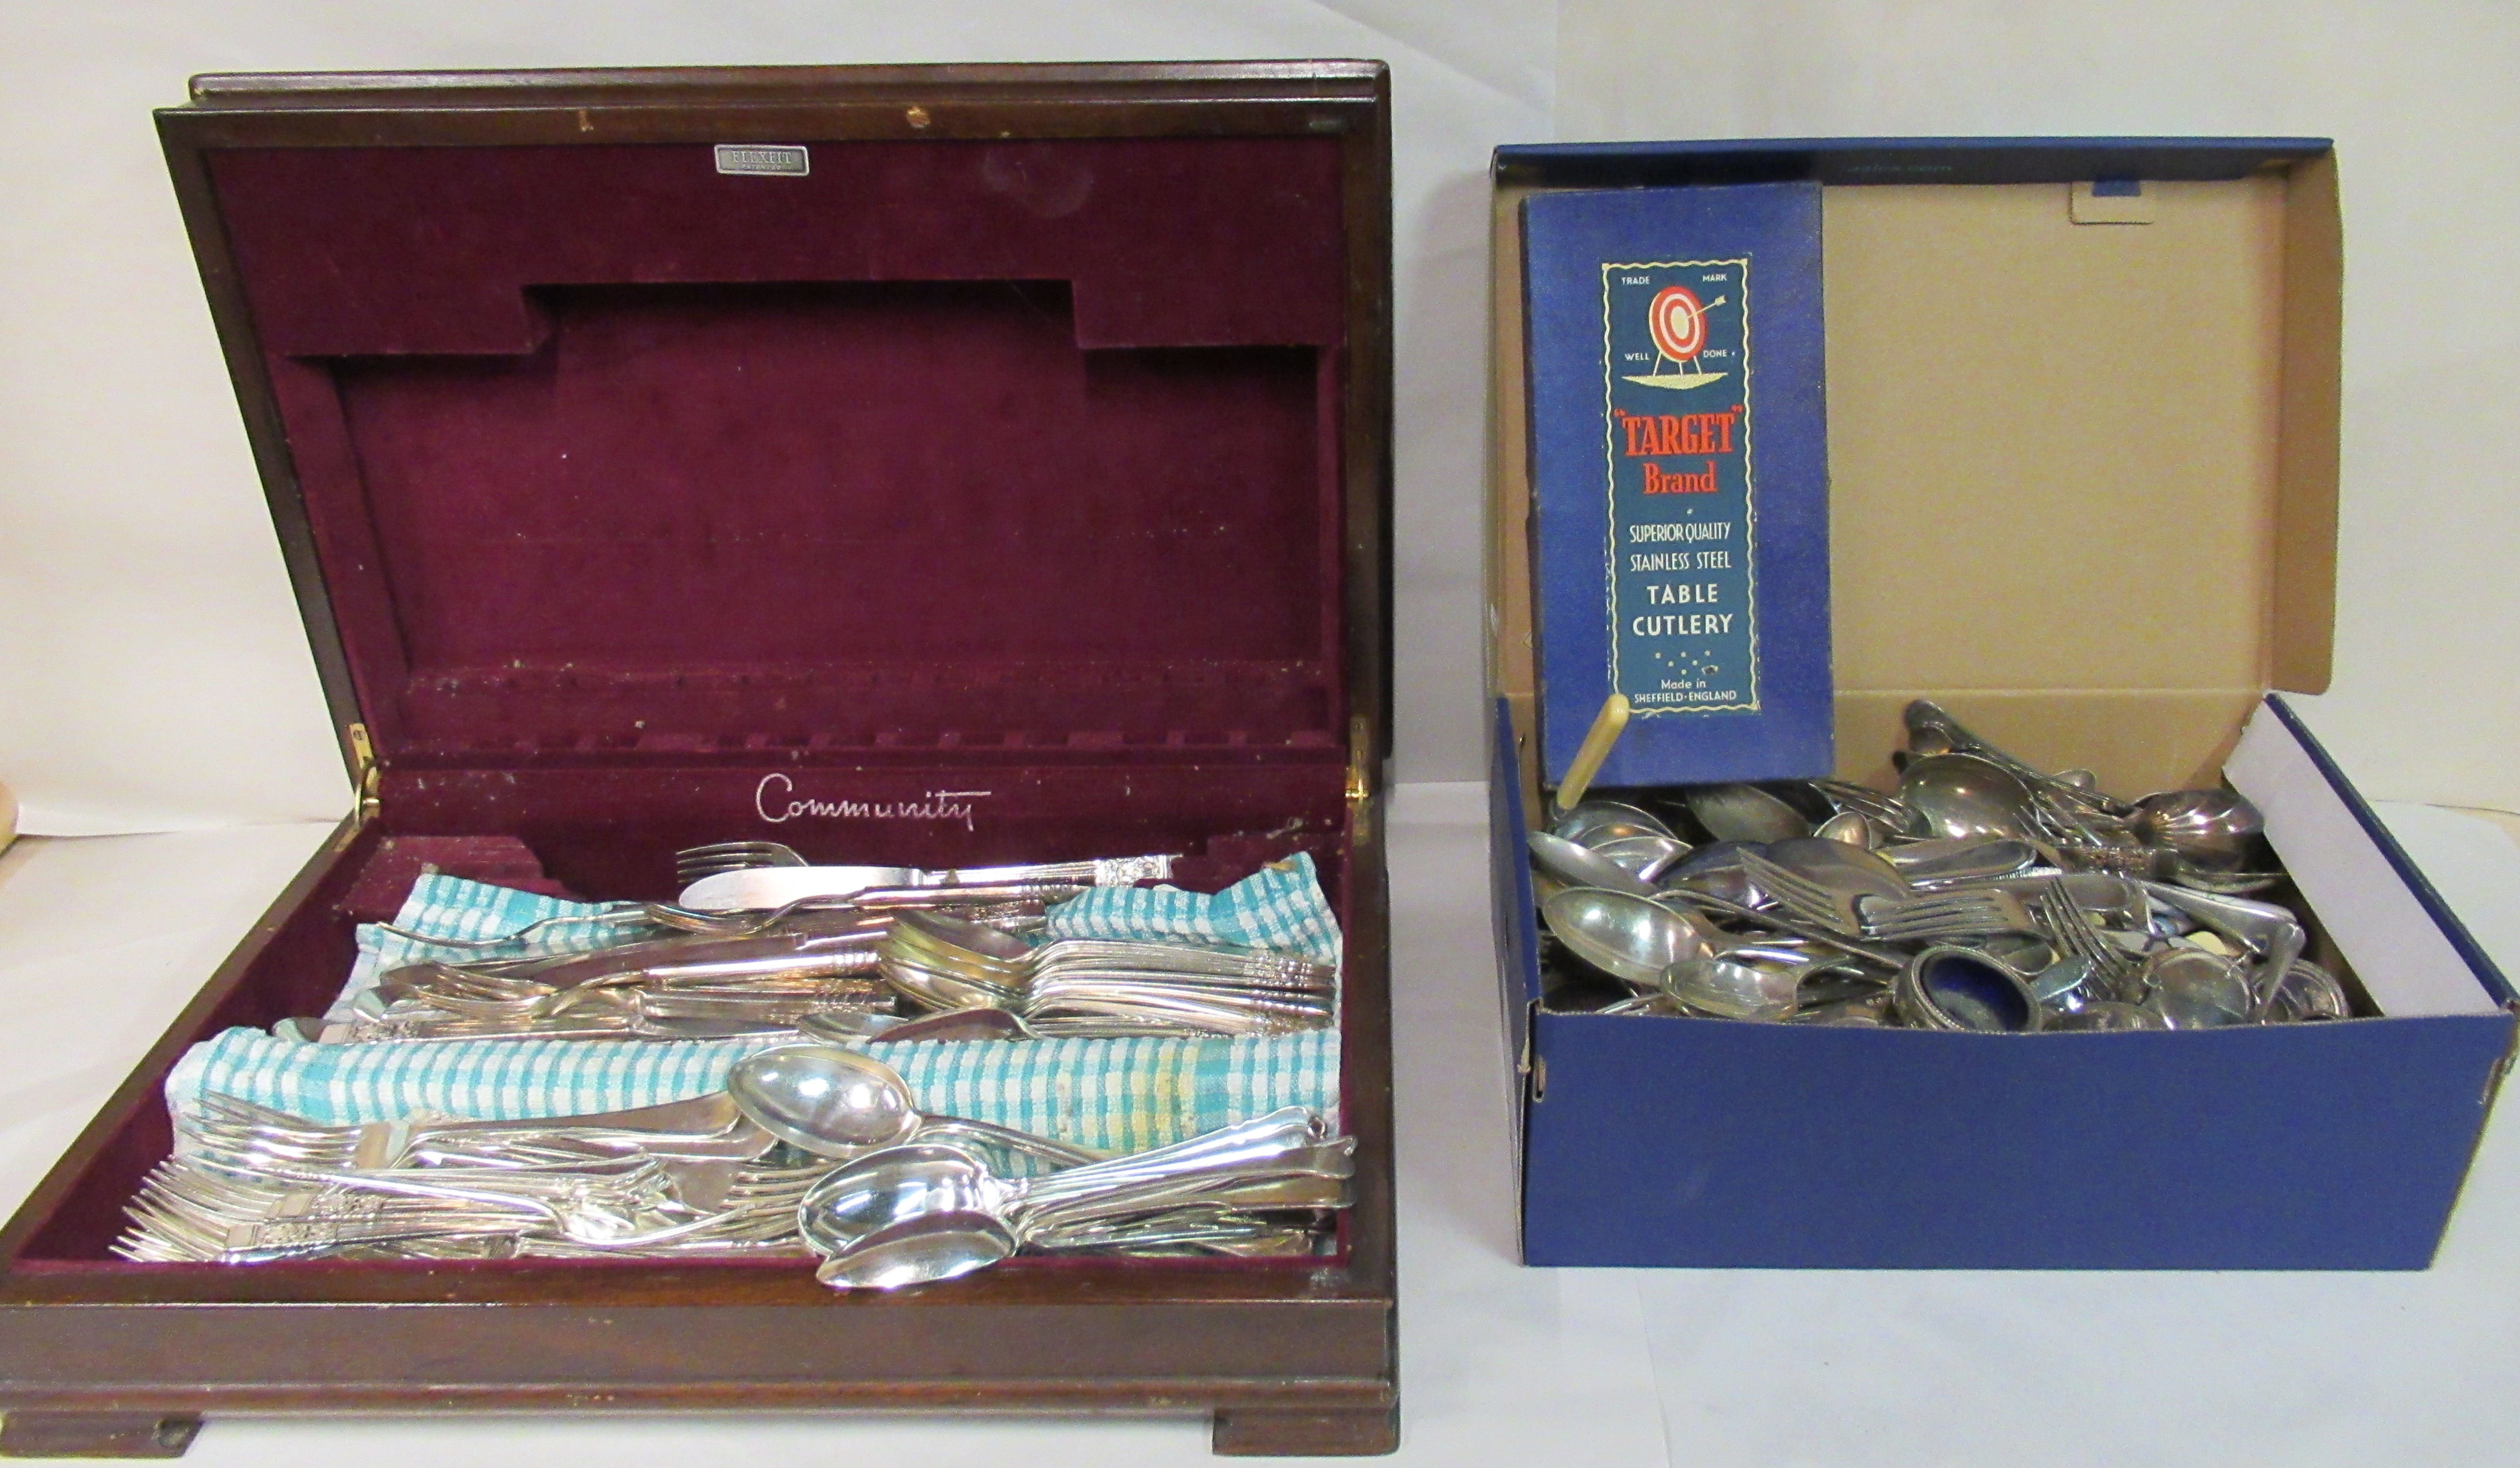 Community and other silver plated cutlery and flatware, some with stainless steel blades  various